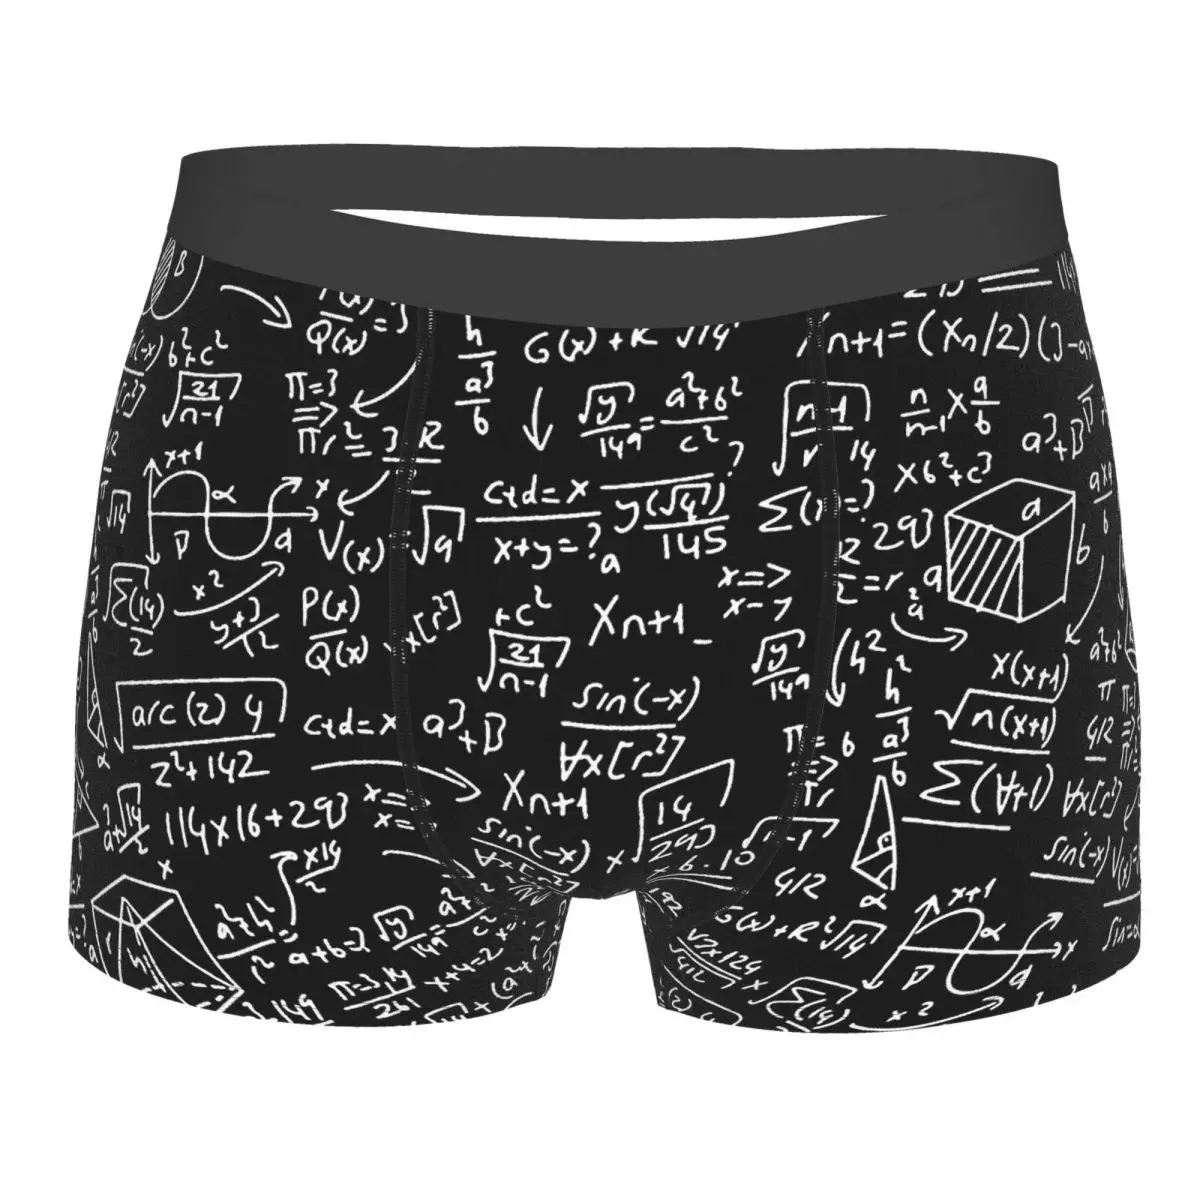 men's underwear with ball pocket Math Science Chemistry Physical Underpants Breathbale Panties Male Underwear Print Shorts Boxer Briefs mens underwear sale Boxers